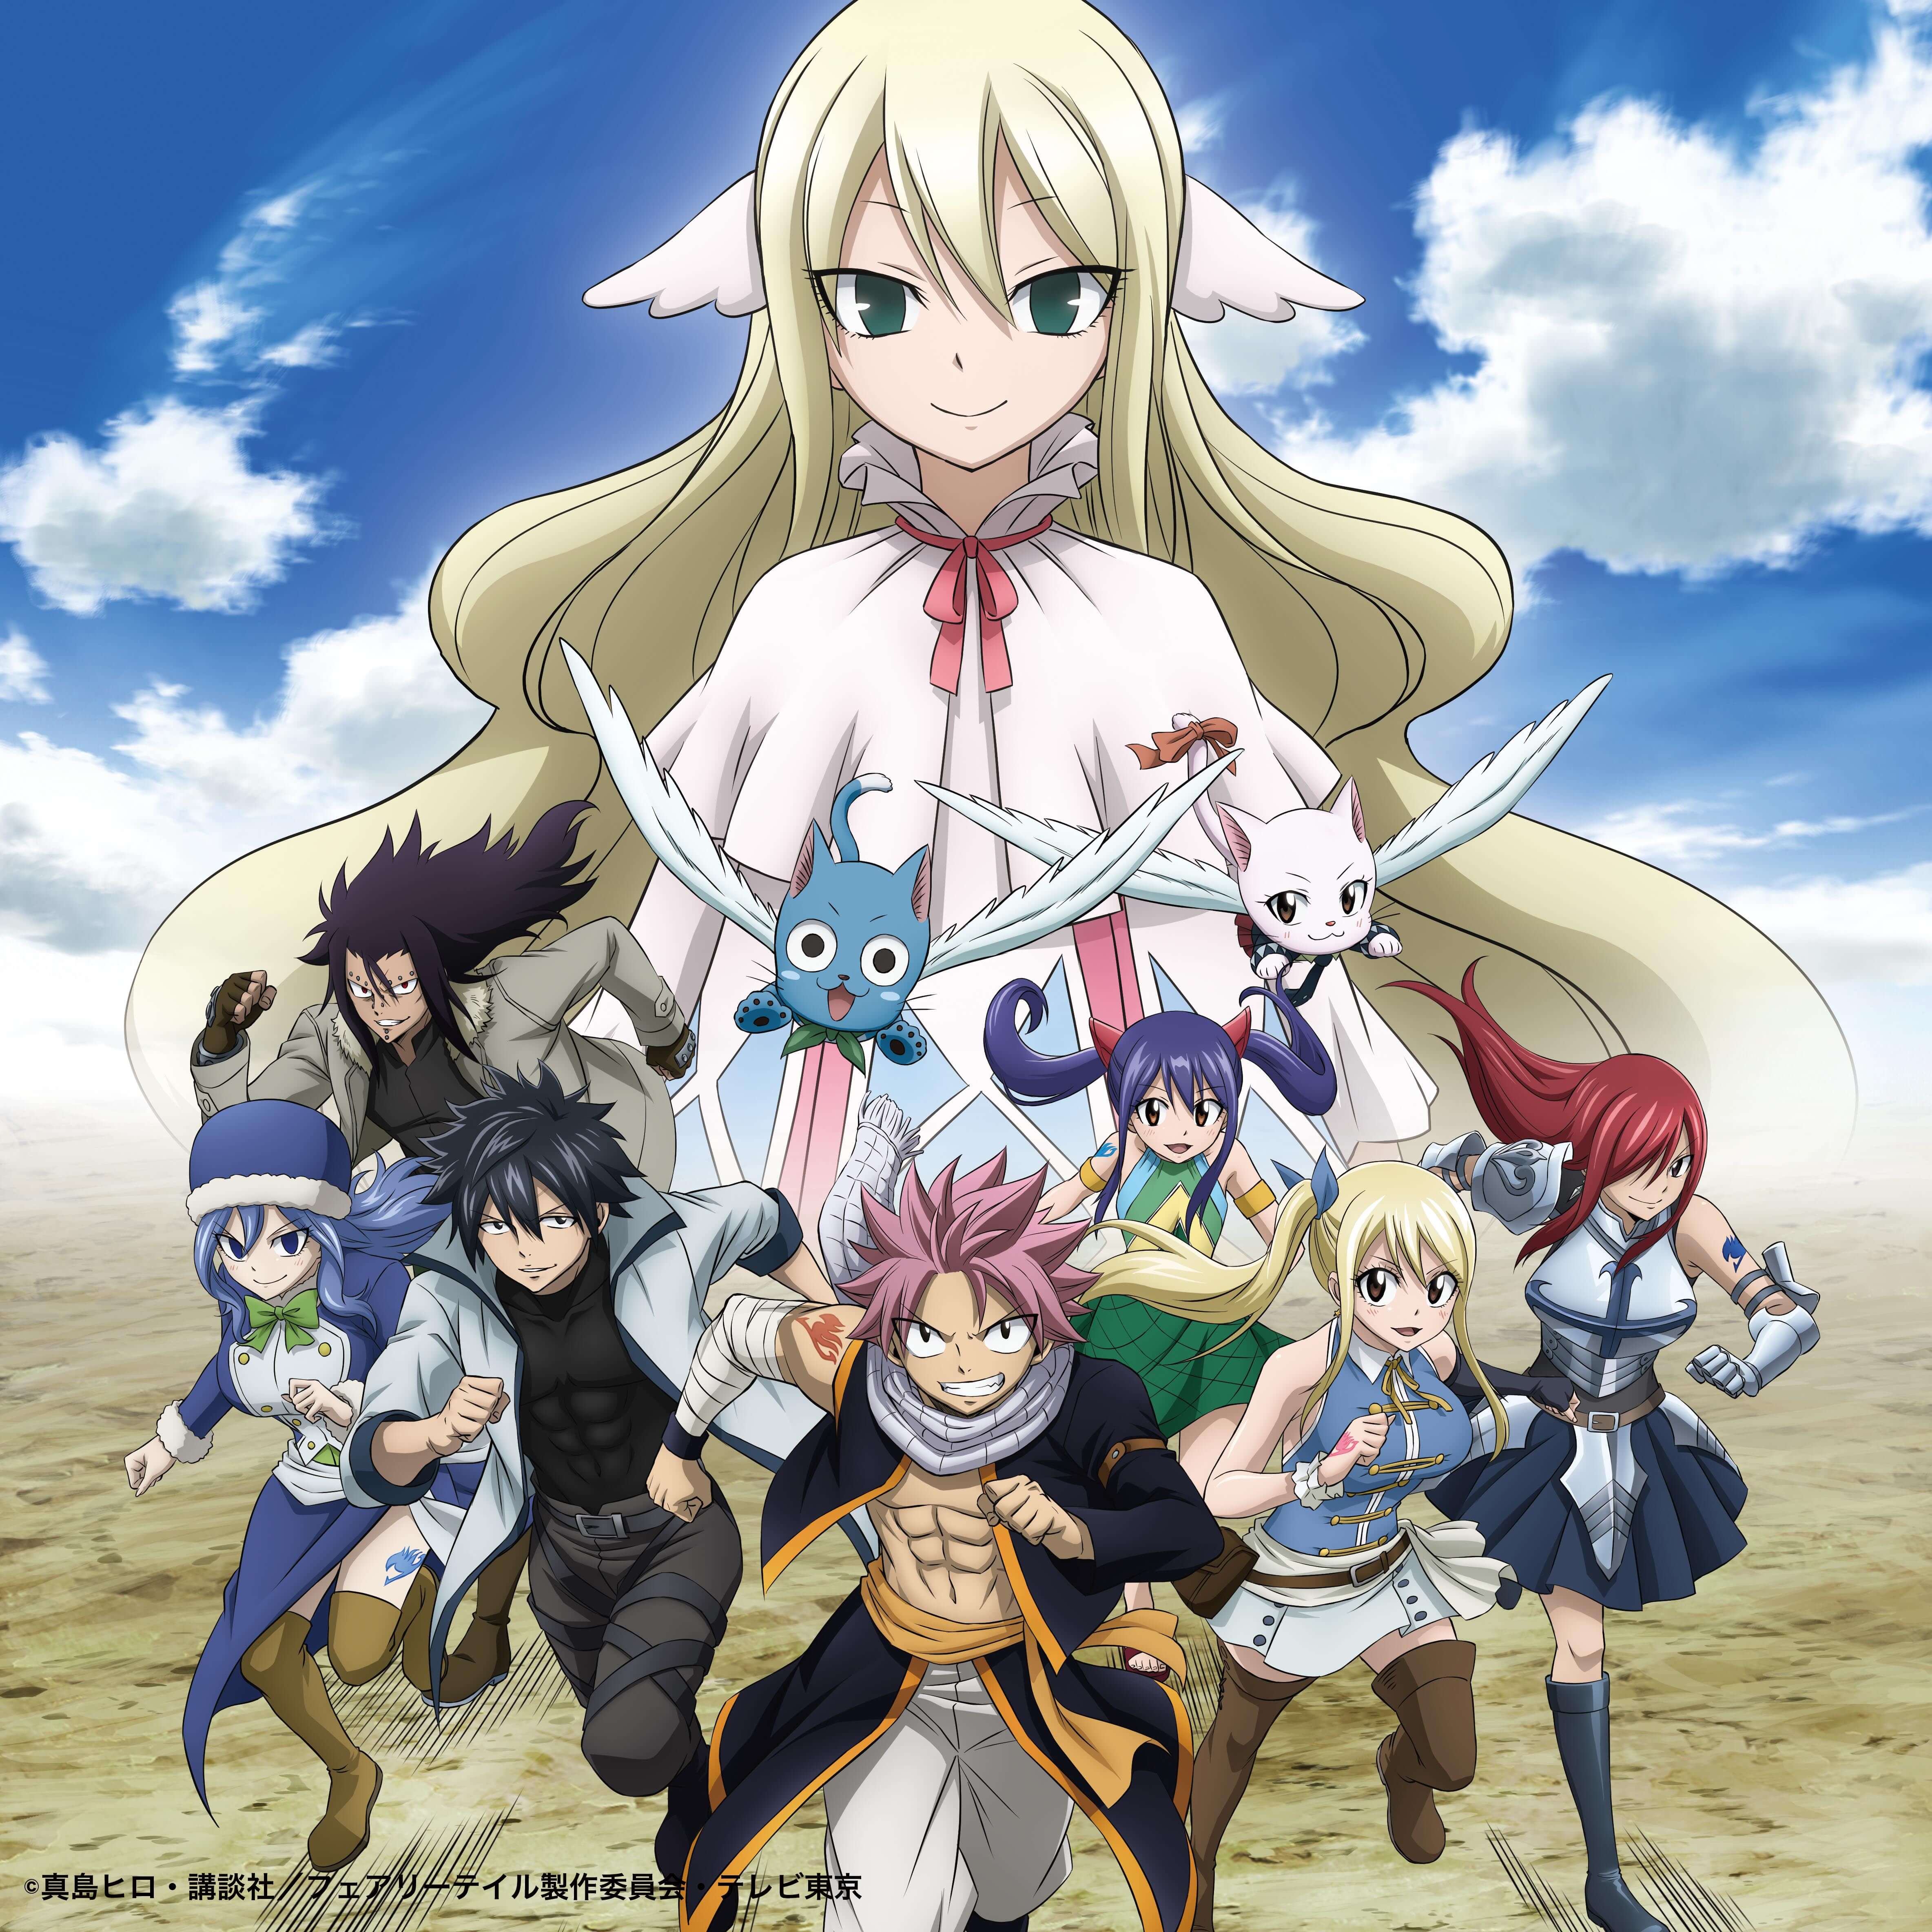 Miyuna Performs Fairy Tails New Ending Theme Song Moshi - 